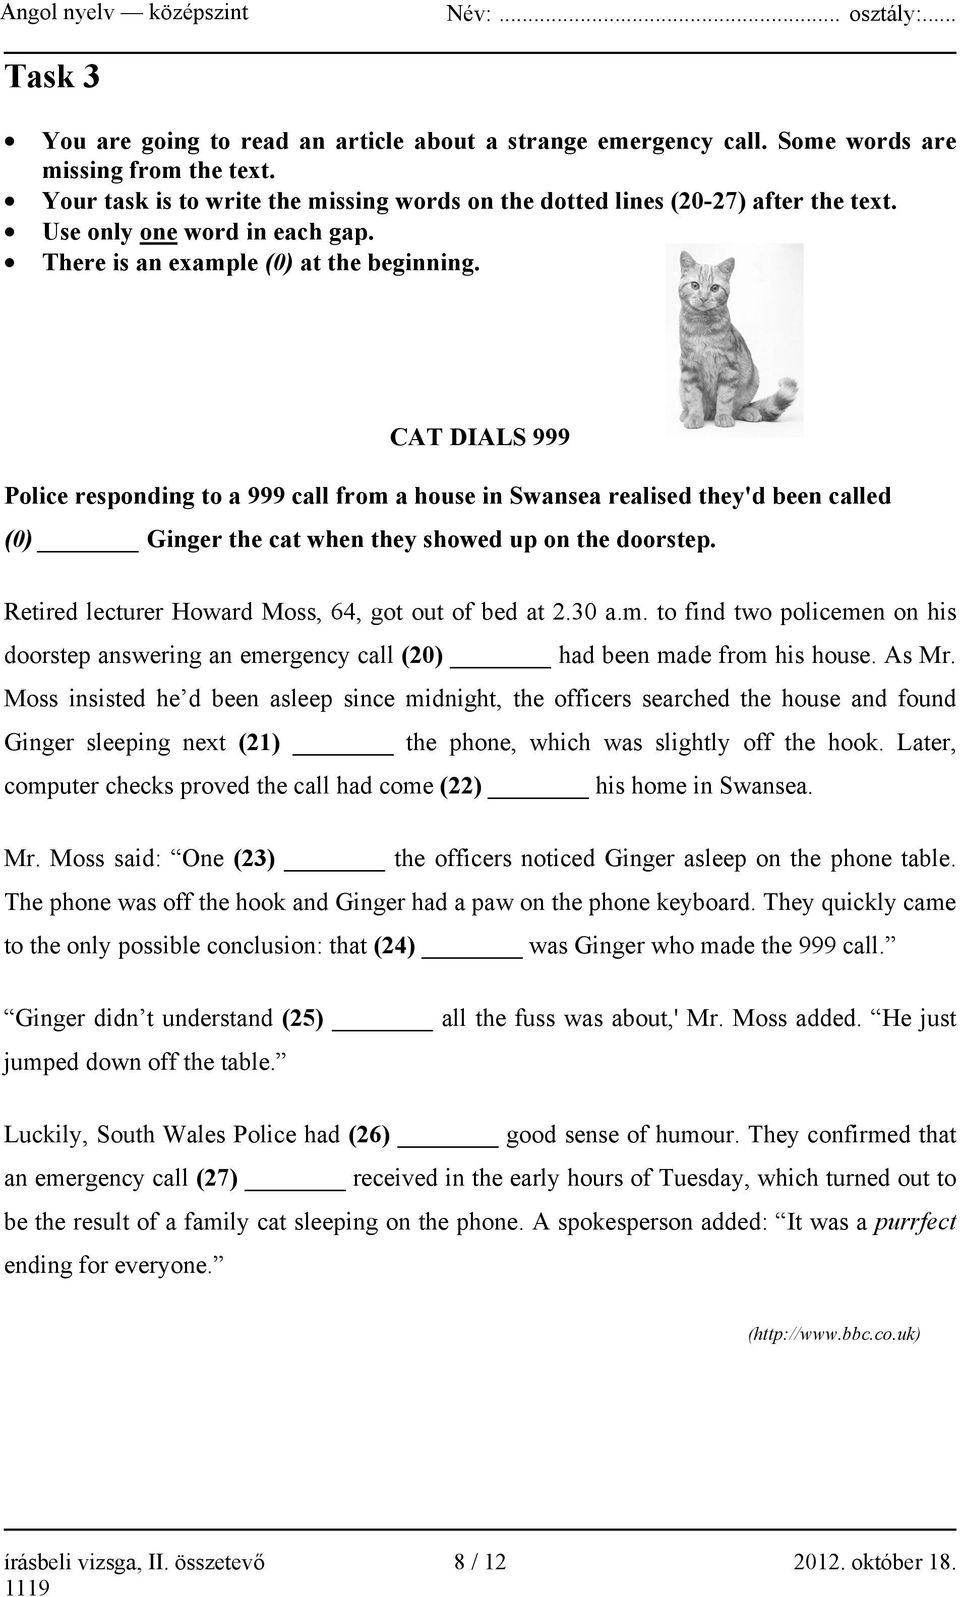 CAT DIALS 999 Police responding to a 999 call from a house in Swansea realised they'd been called (0) Ginger the cat when they showed up on the doorstep.